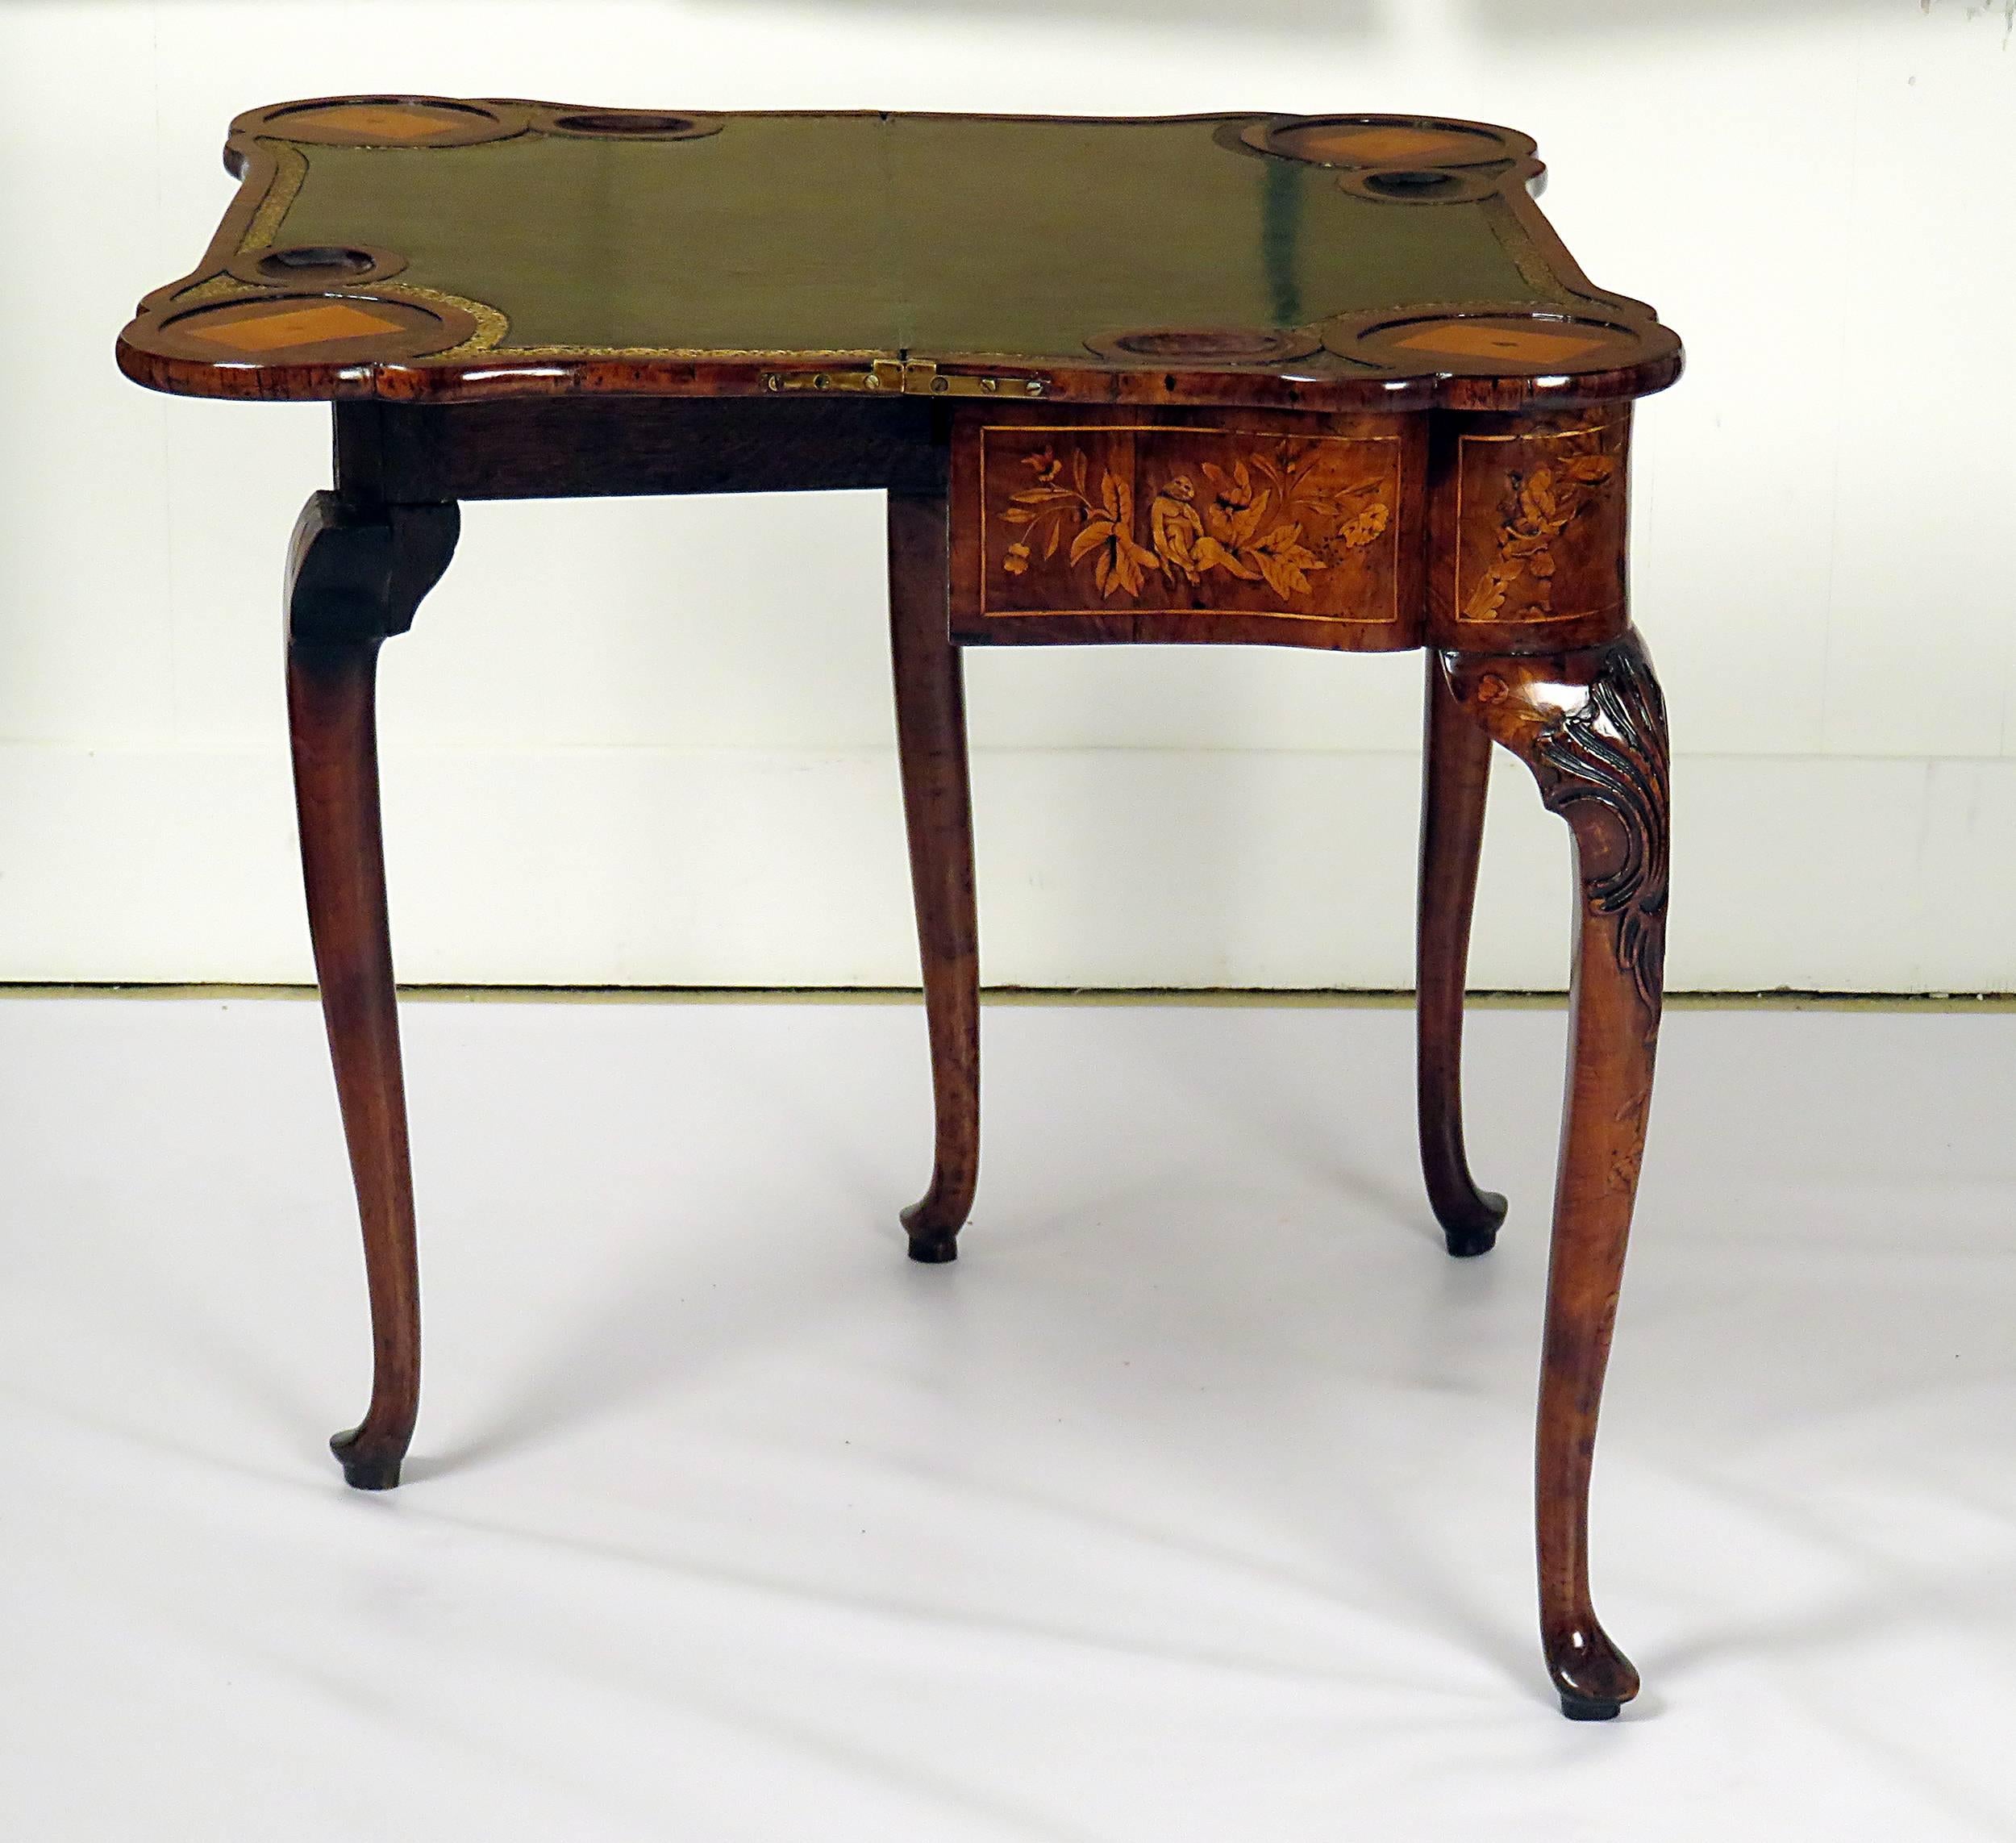 Mid-18th Century George II English Inlaid Games Table in Walnut with Boxwood